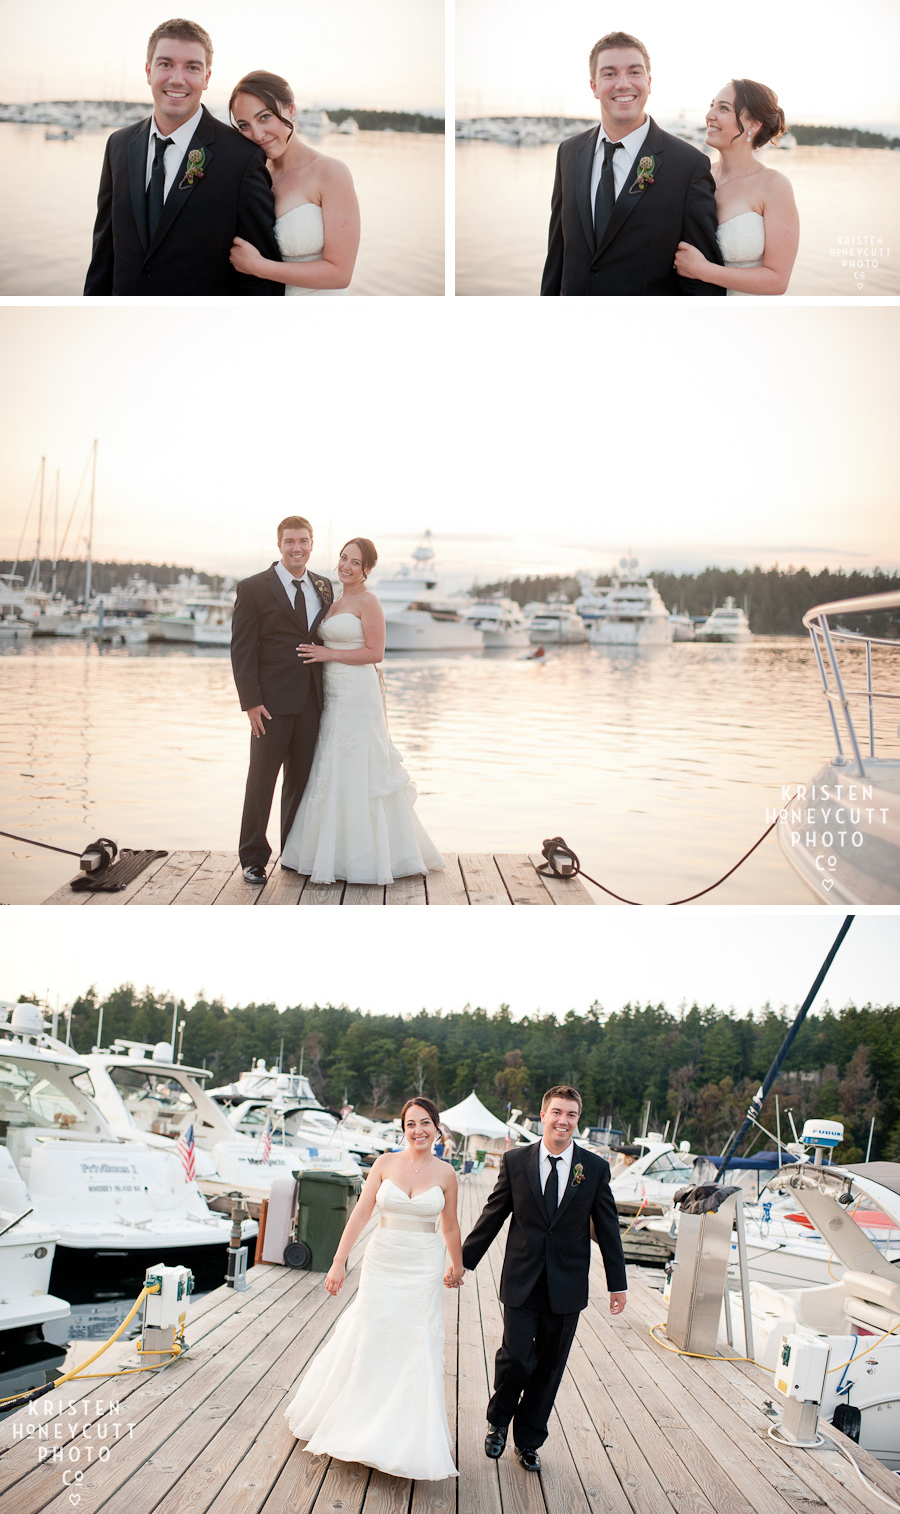 Sunset portraits of the bride and groom in the marina